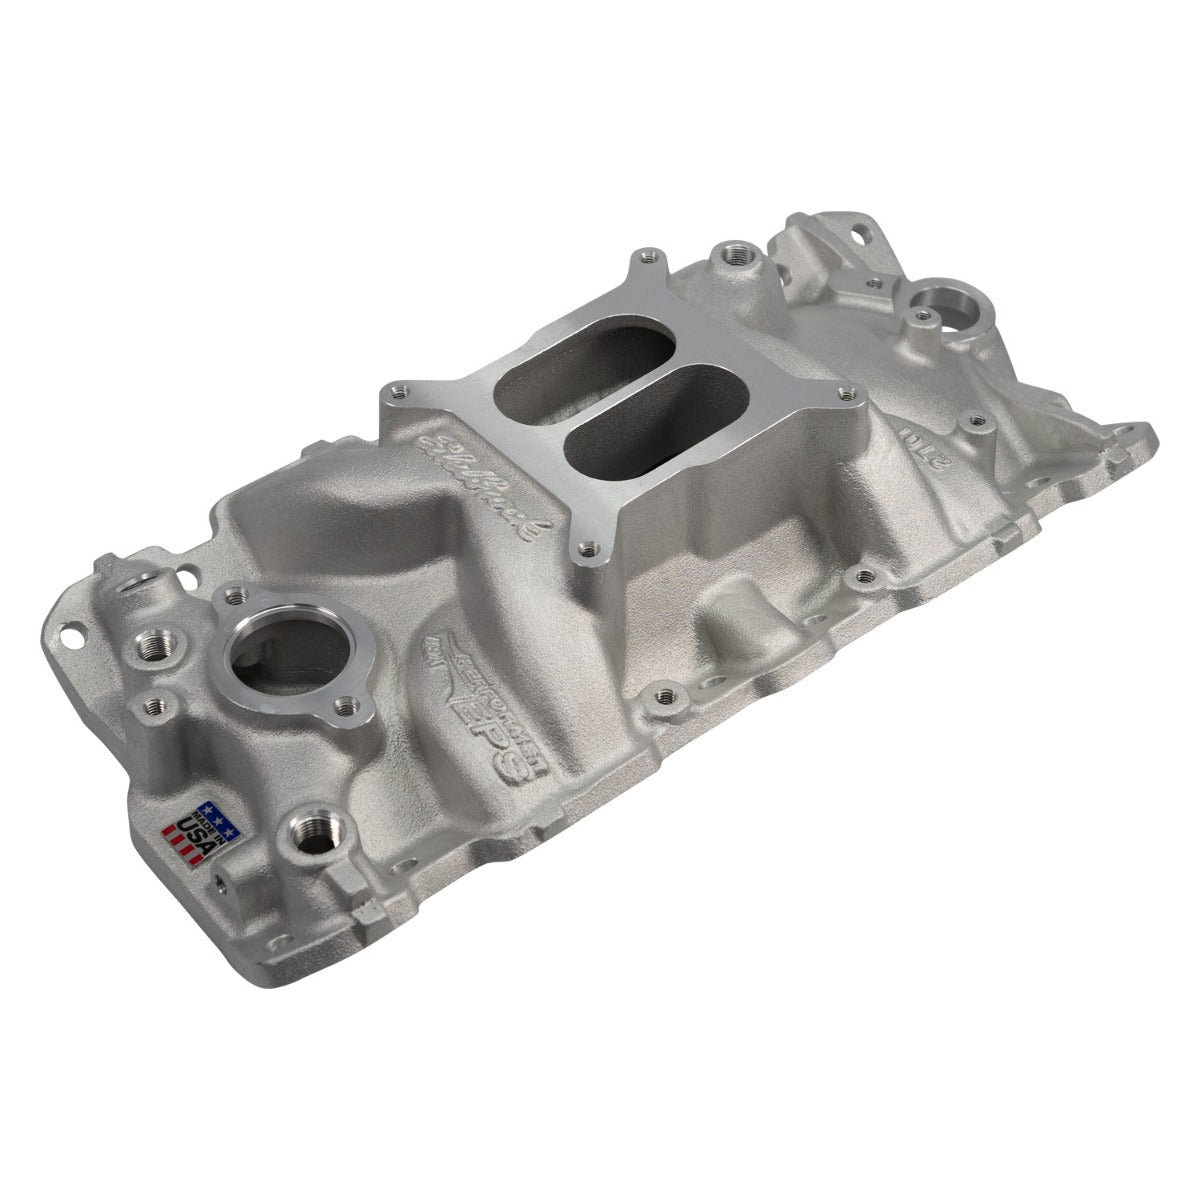 Edelbrock Performer EPS Intake Manifold For 1955-1986 Small-Block Chevy - 2701